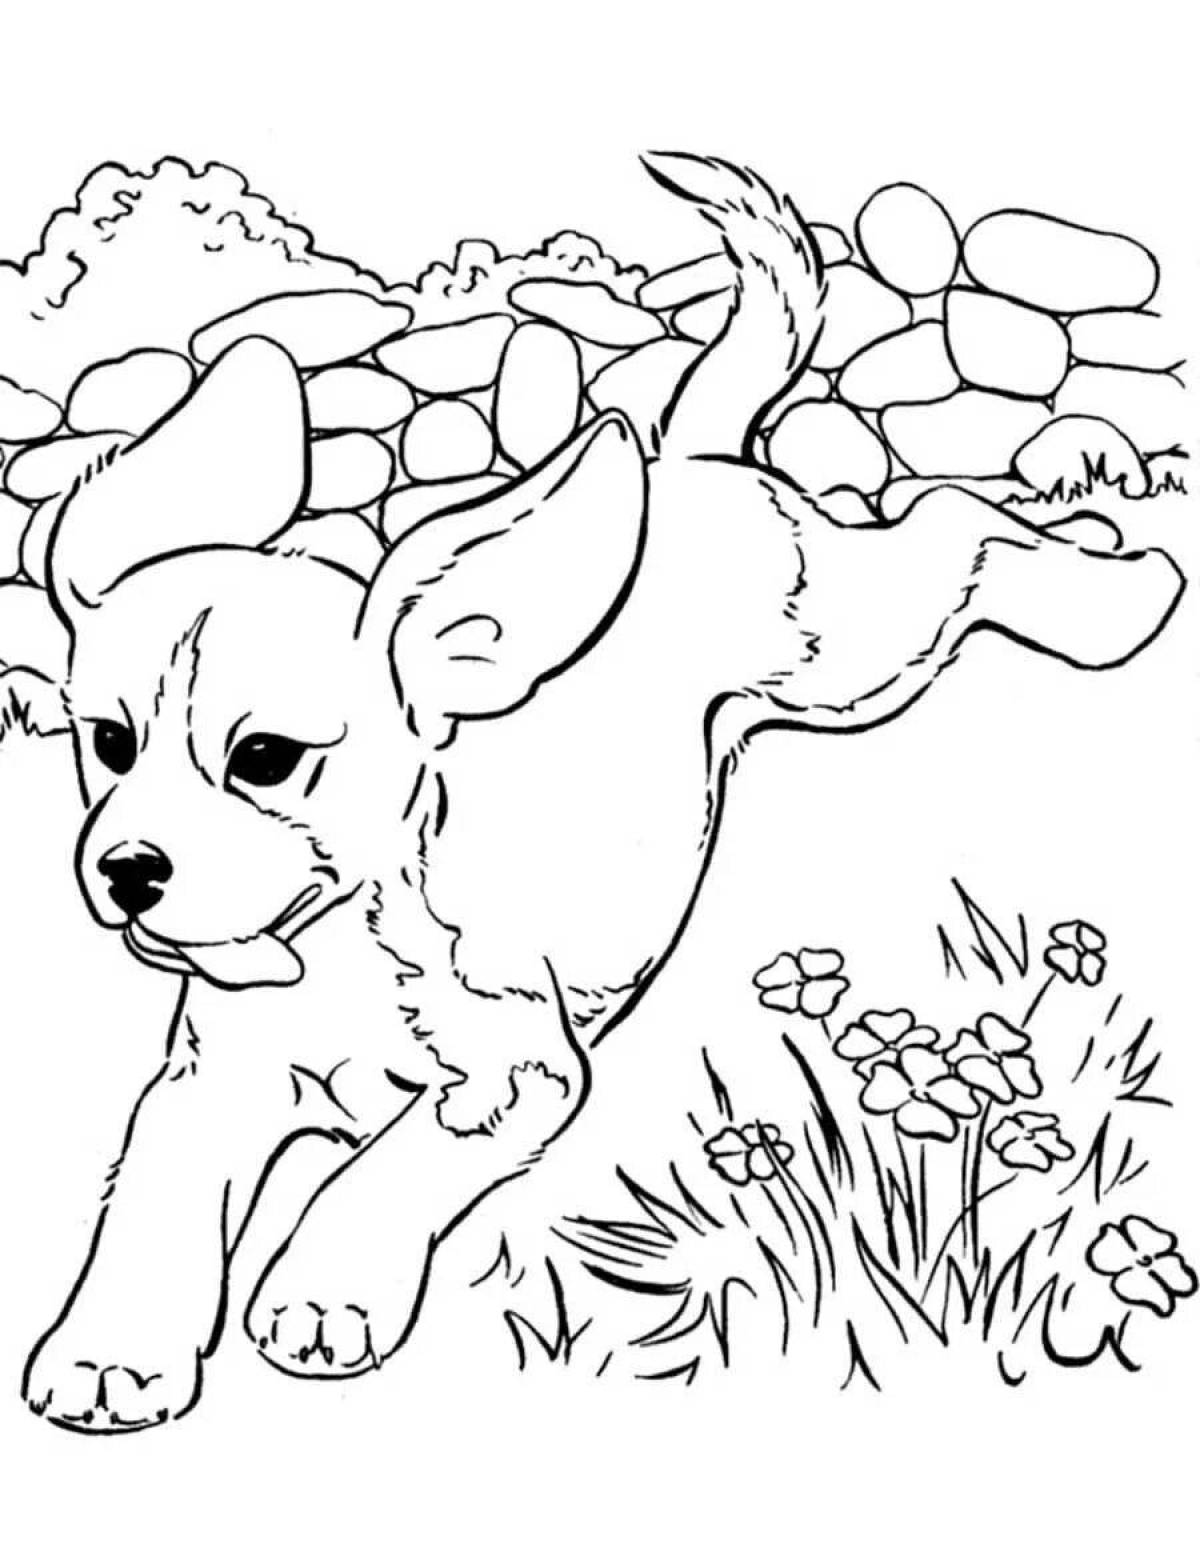 Coloring page dazzling dog